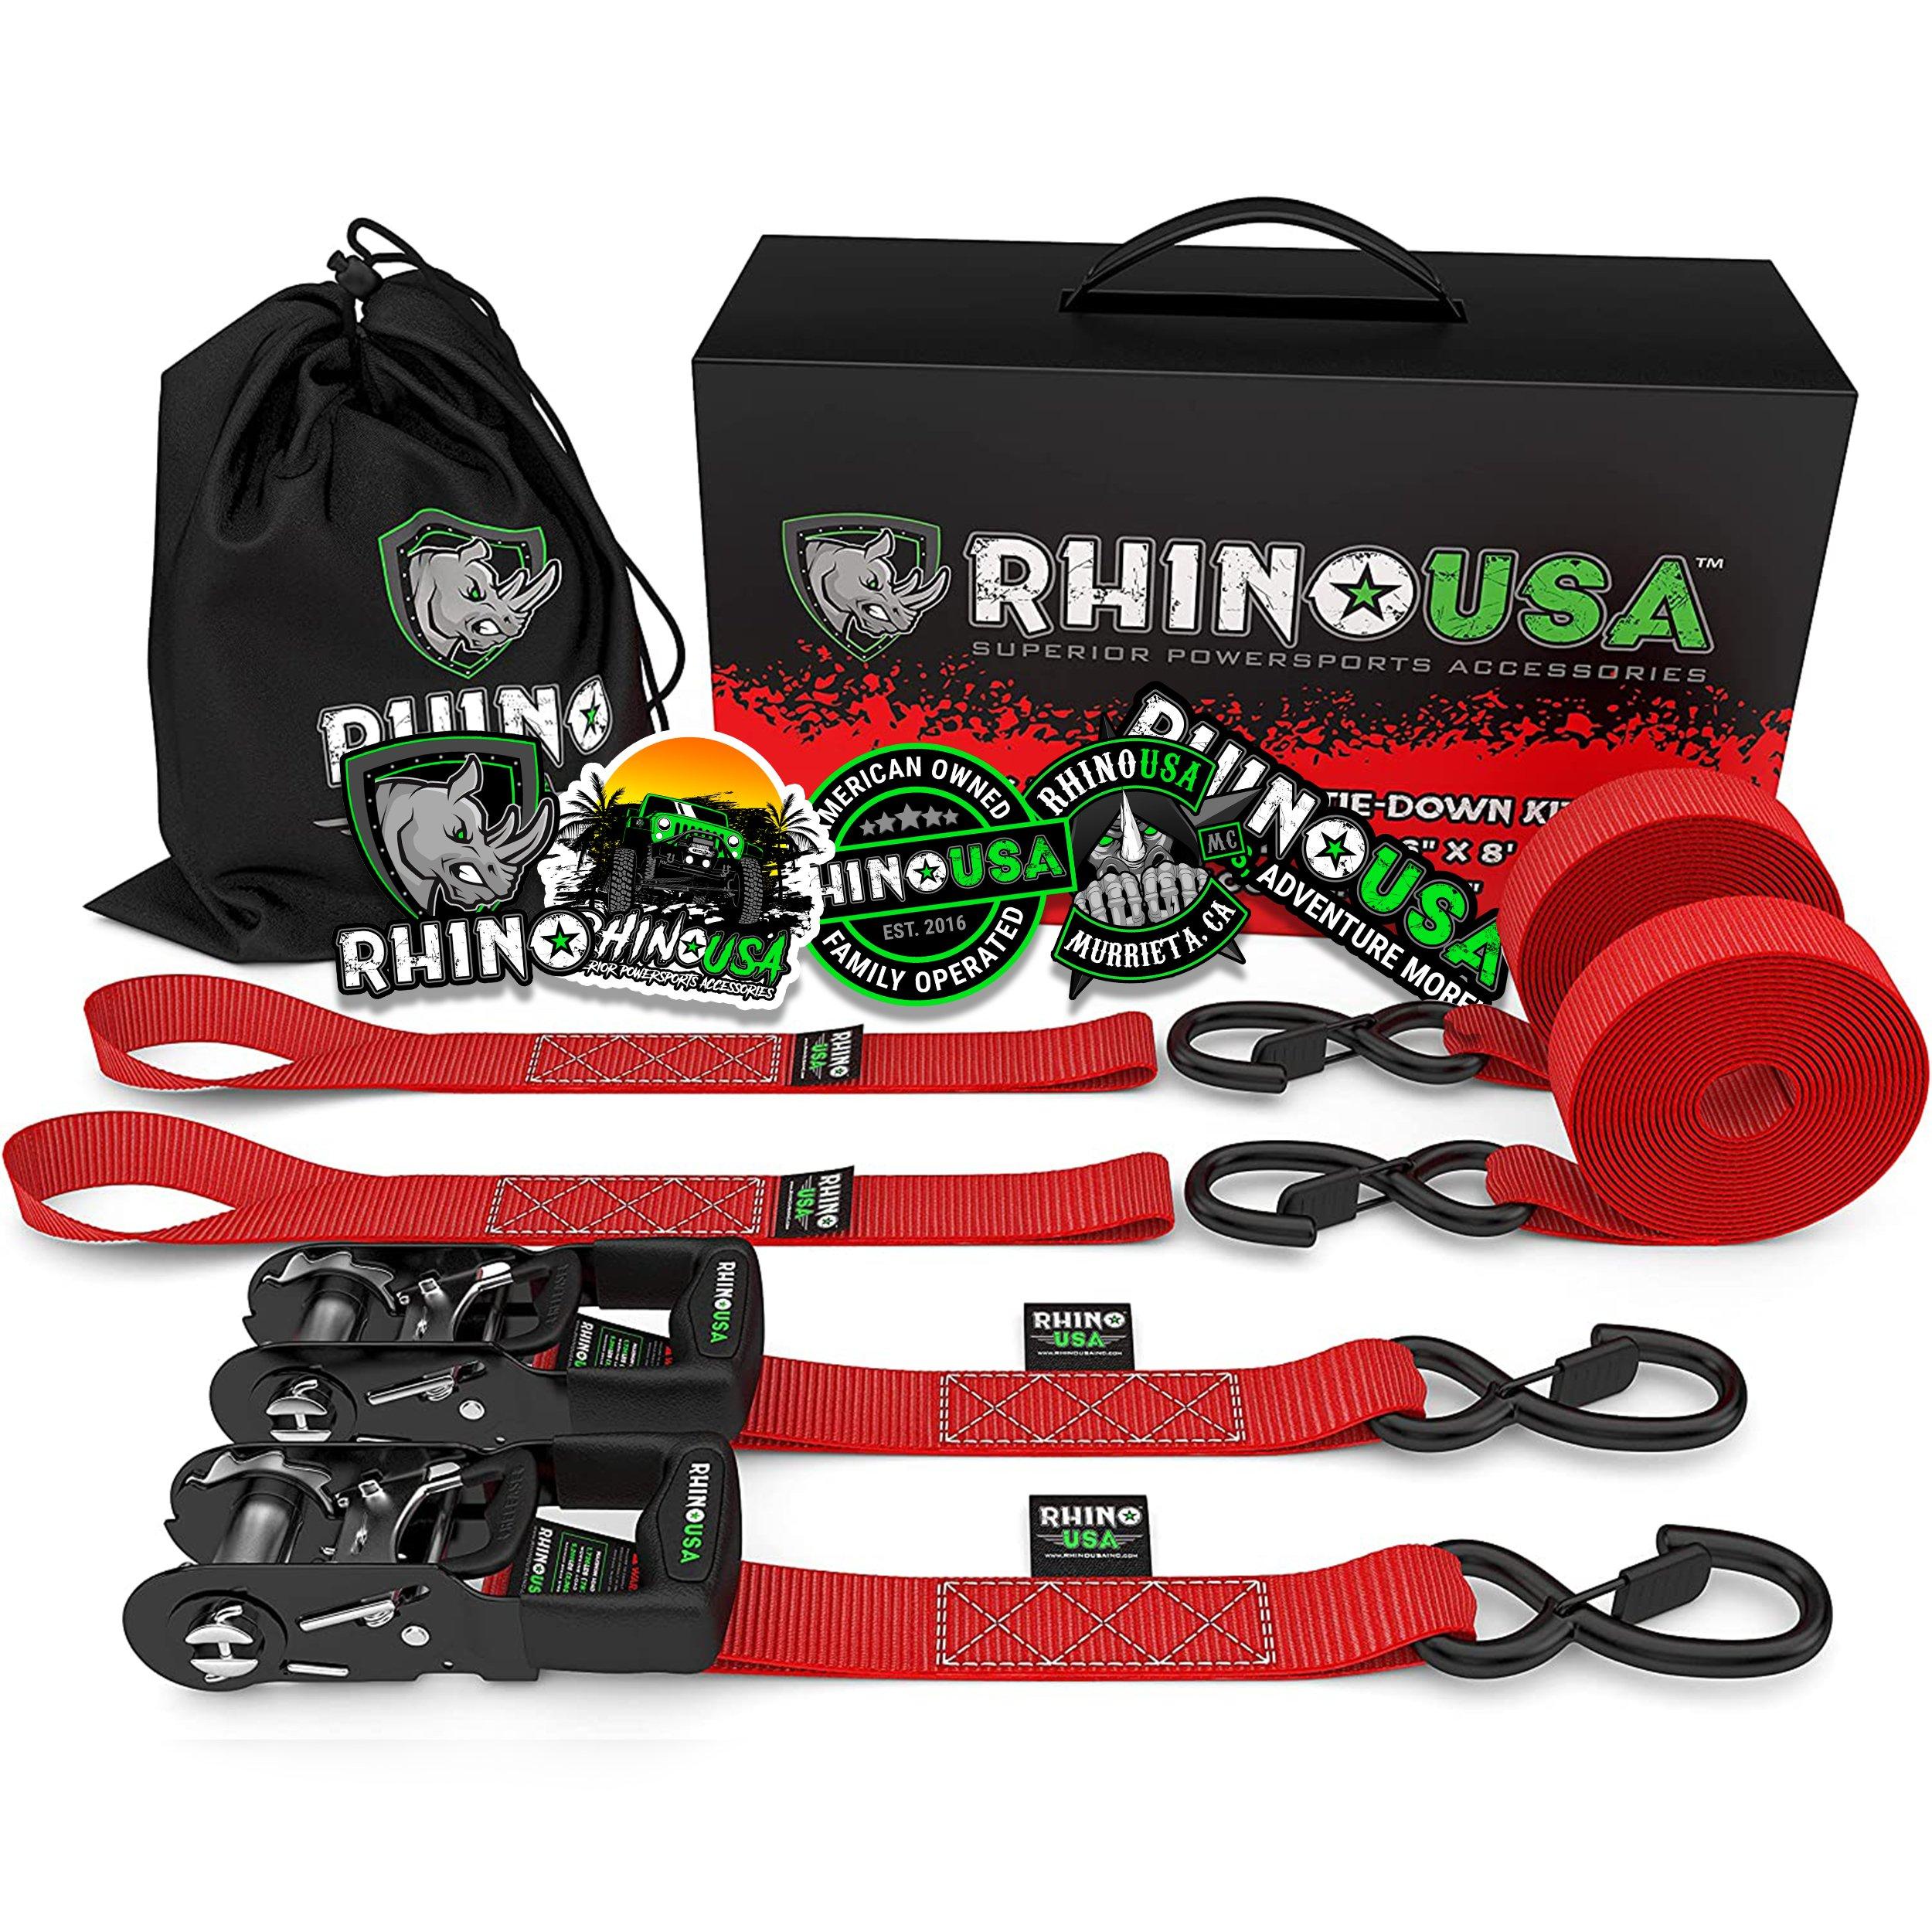 Rhino USA 1.6in x 8ft HD Ratchet Tie-Down Set (2-Pack Green)